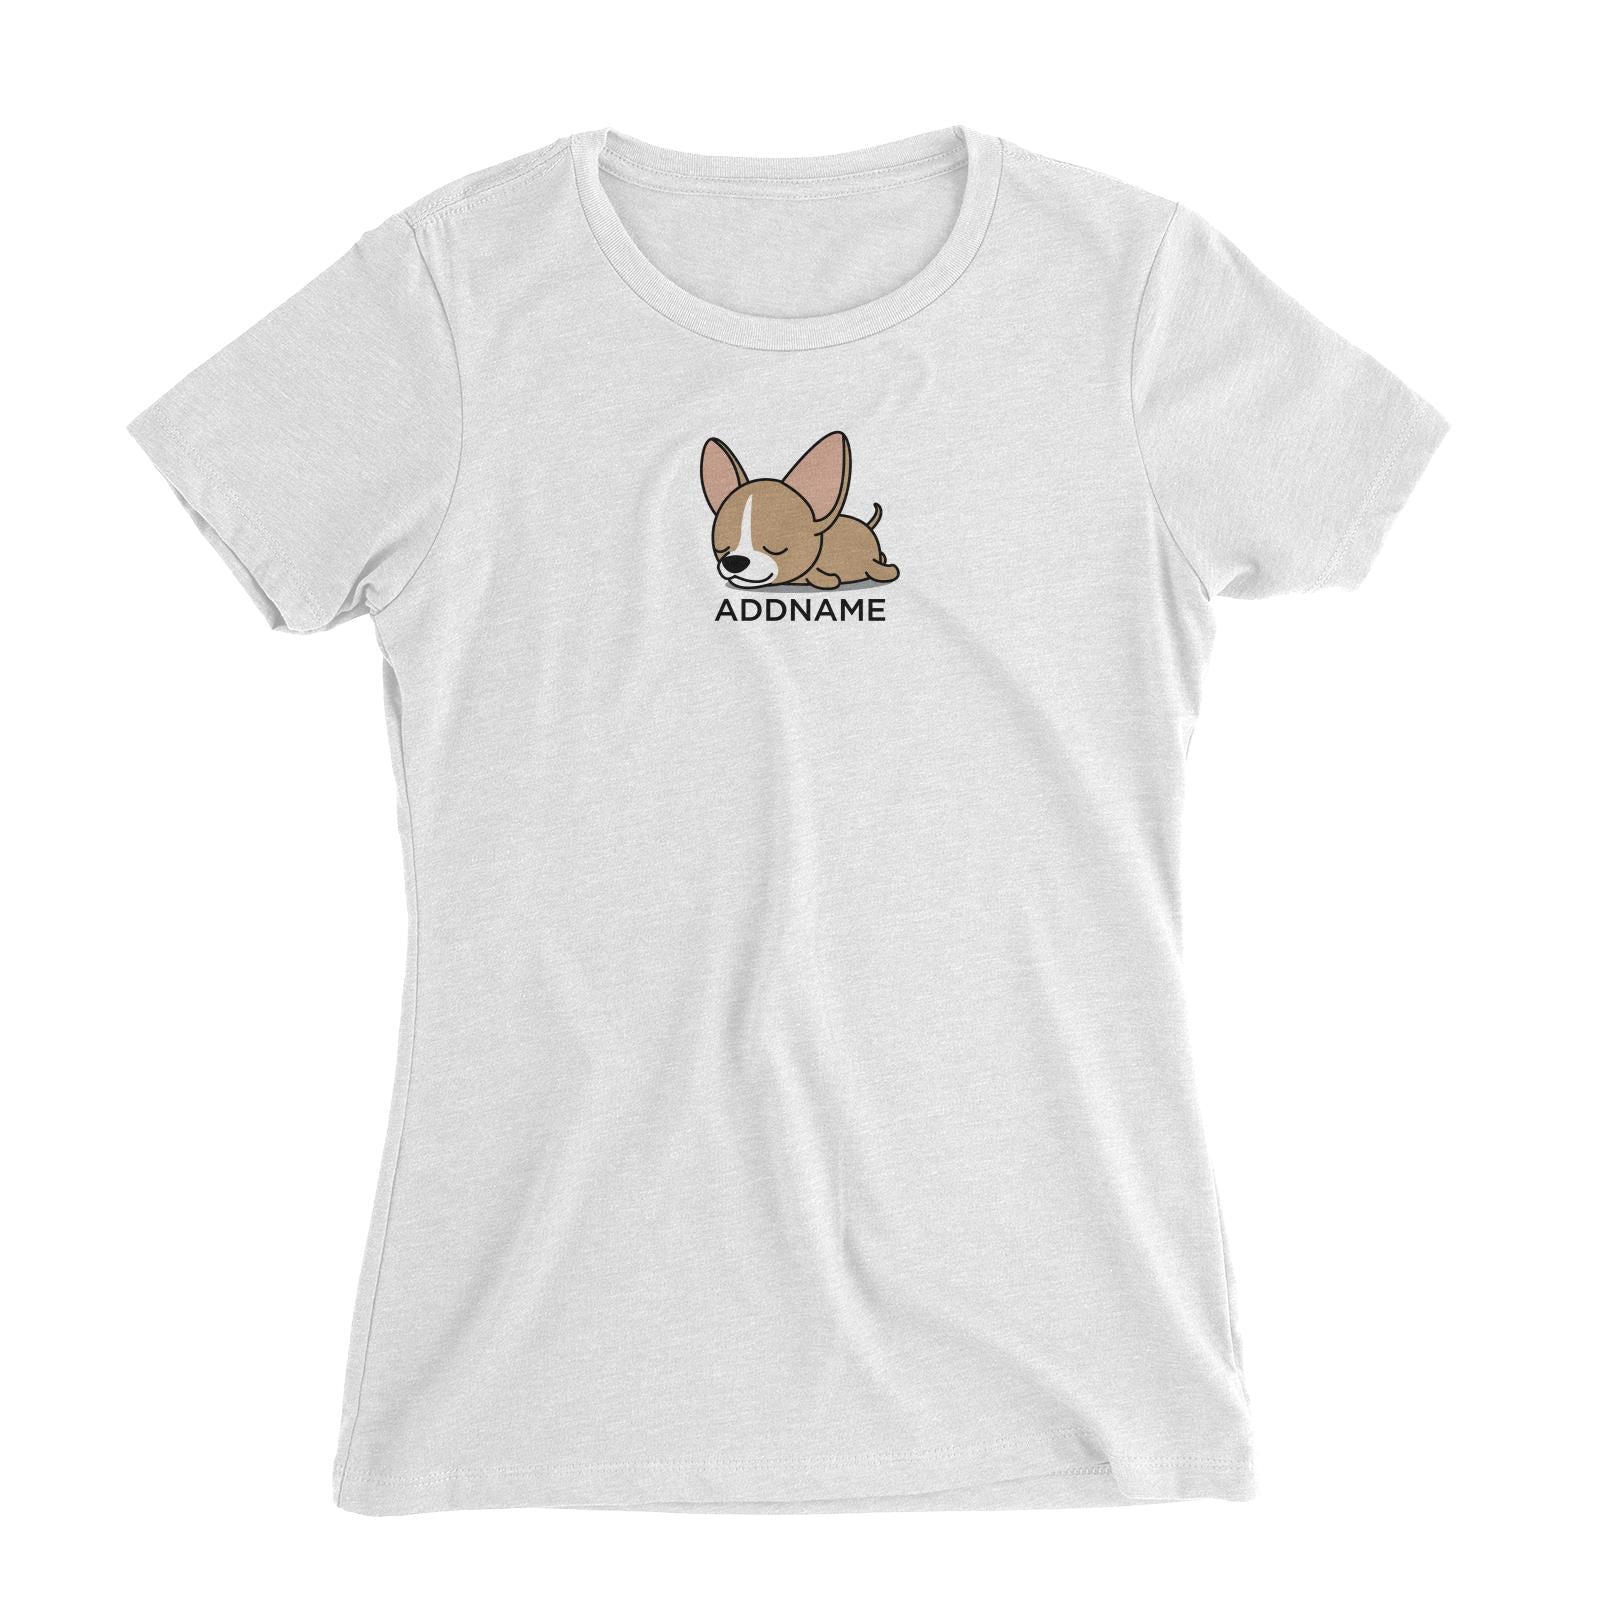 Lazy Chihuahua Dog Addname Women's Slim Fit T-Shirt  (FLASH DEAL)